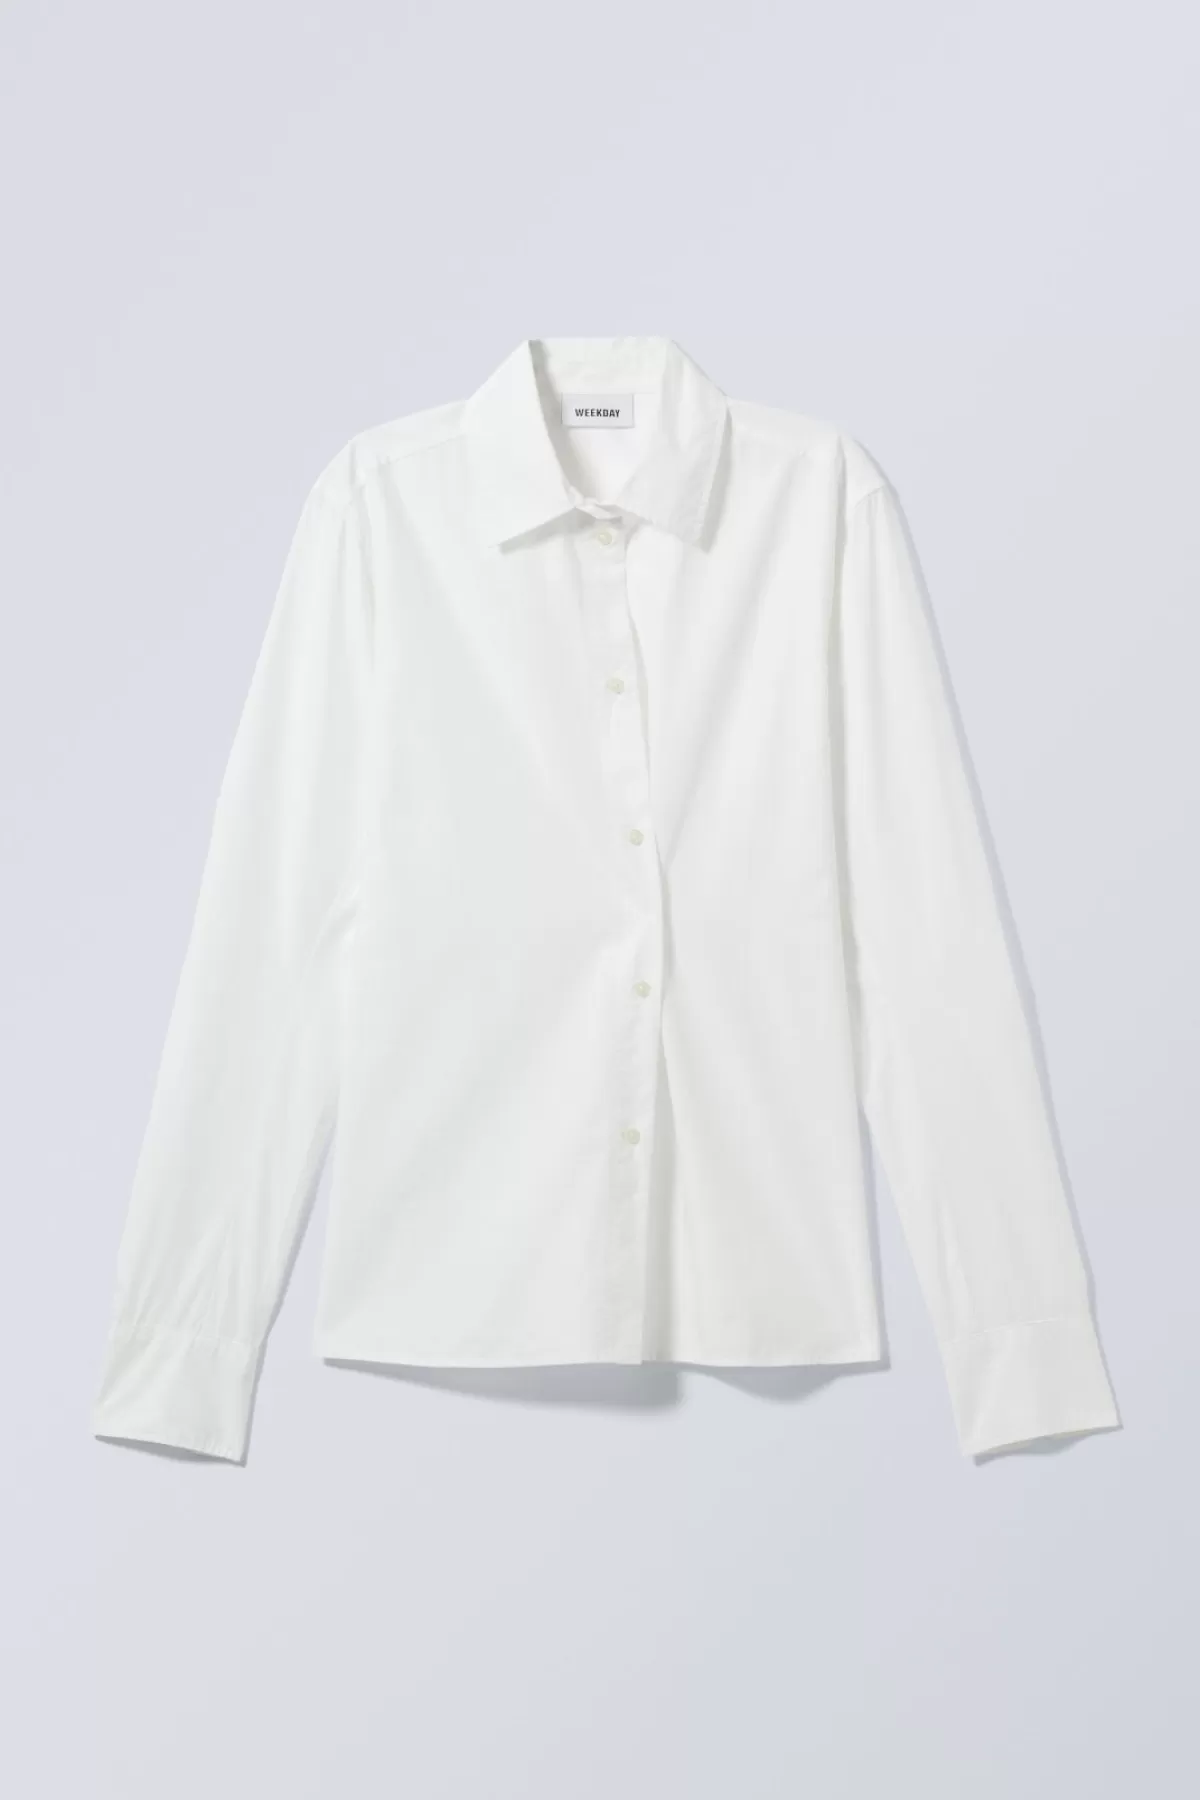 Weekday June Fitted Shirt White Outlet